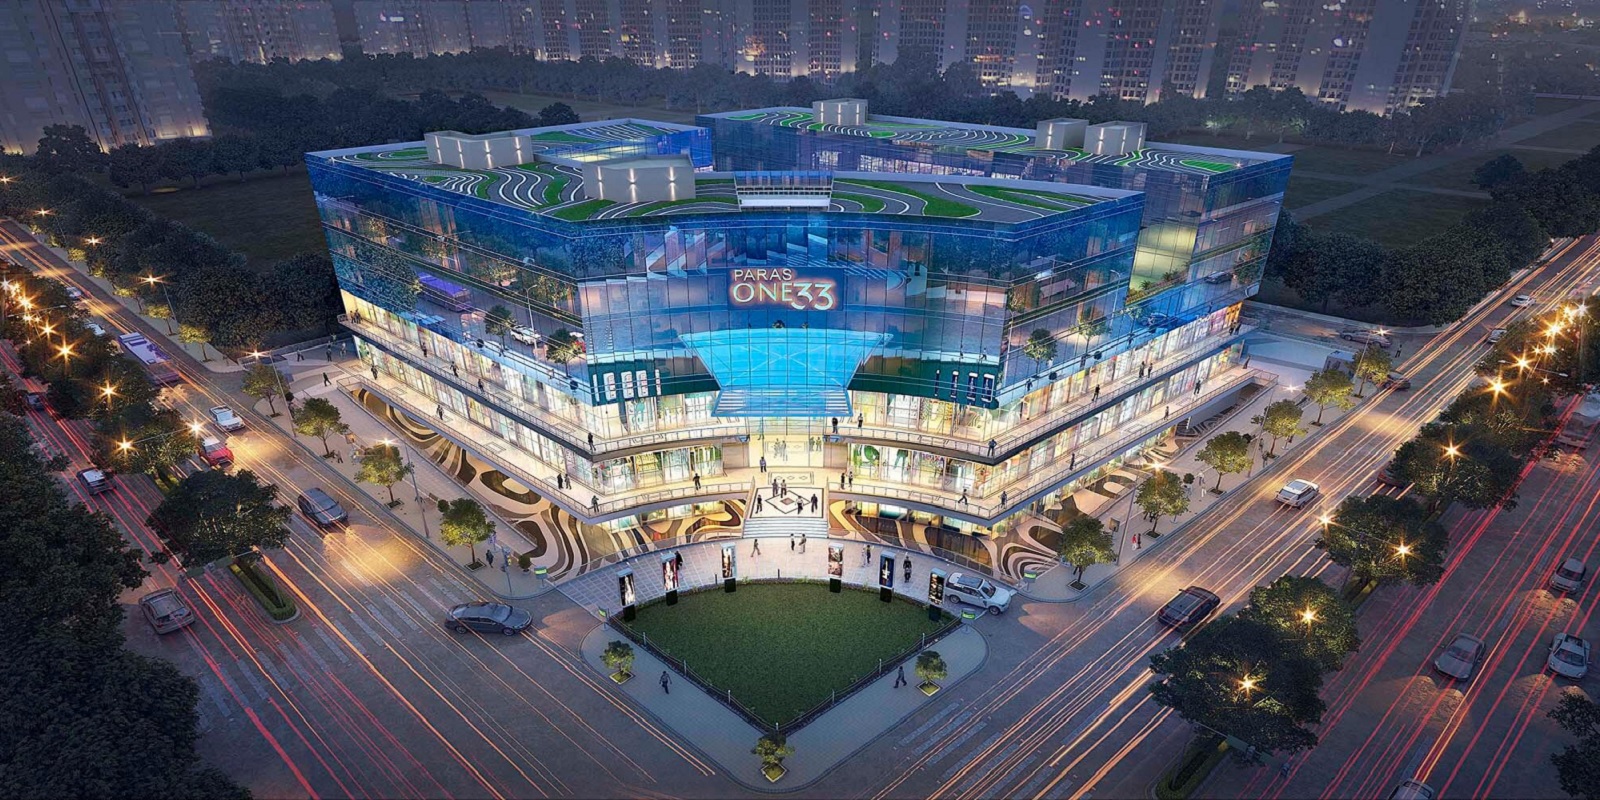 Commercial Shop or Showroom Space For sale in Paras One 33  Noida